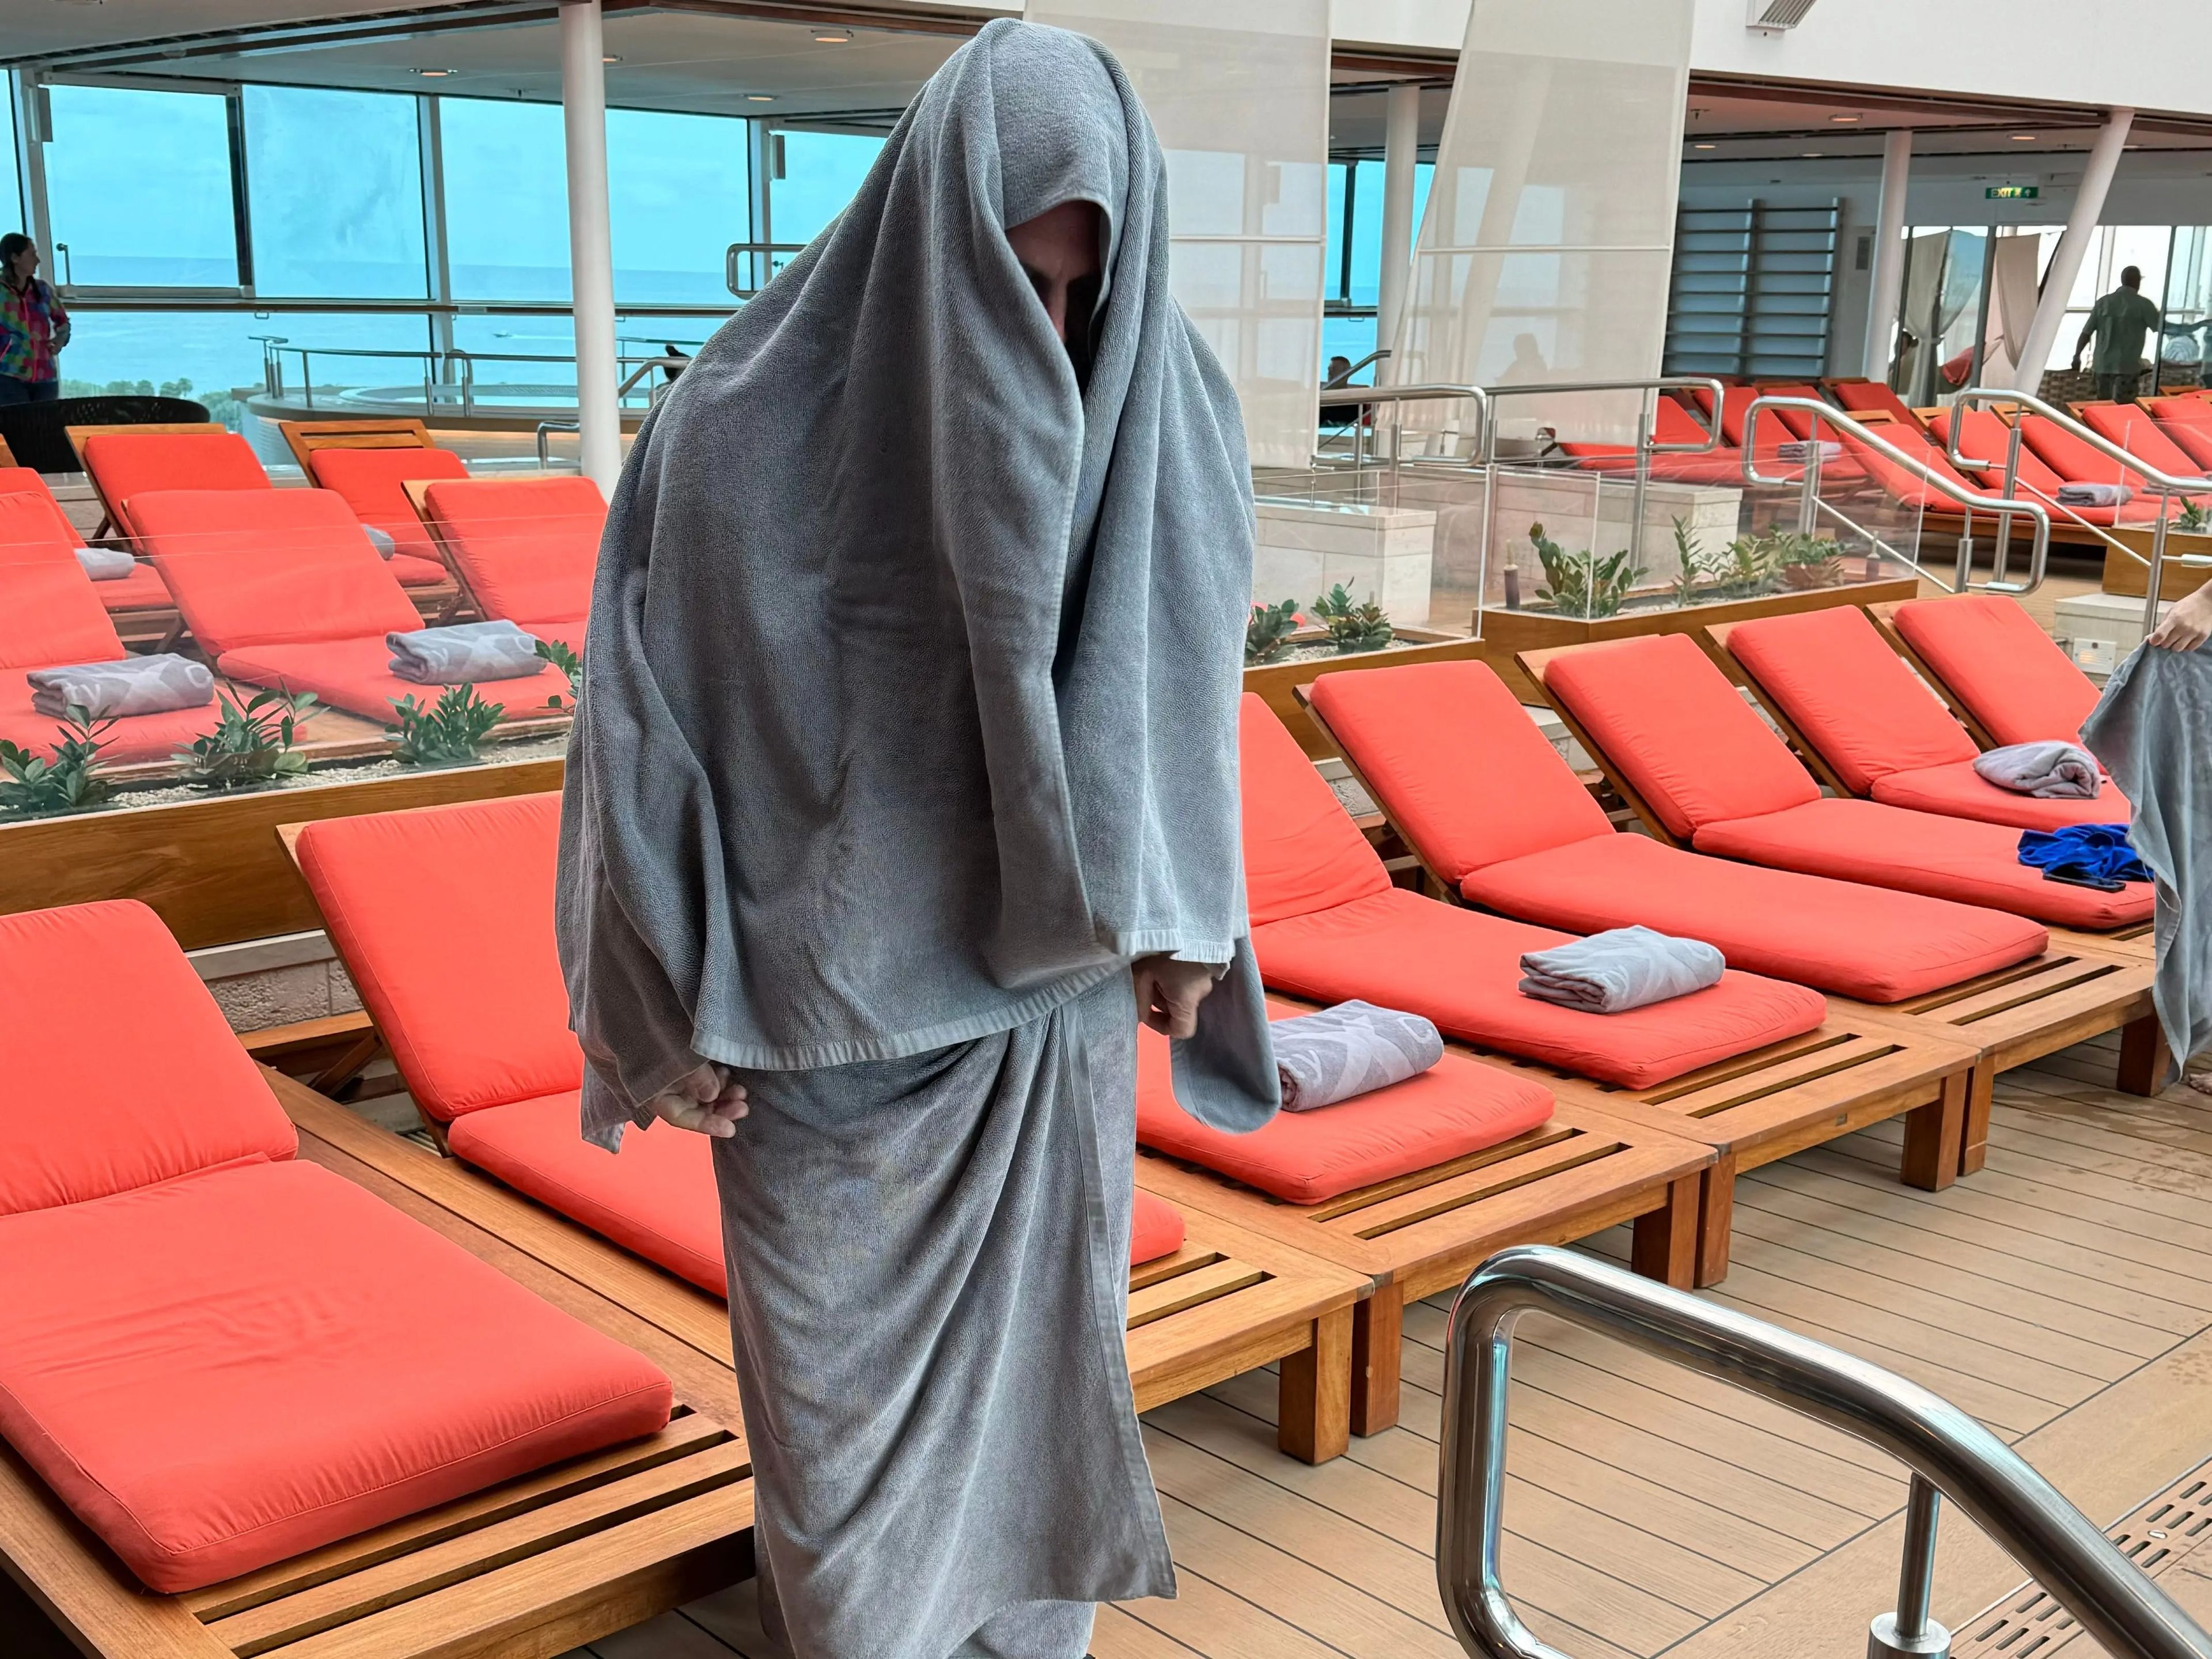 jordana's dad covered in towels on a cruise ship deck